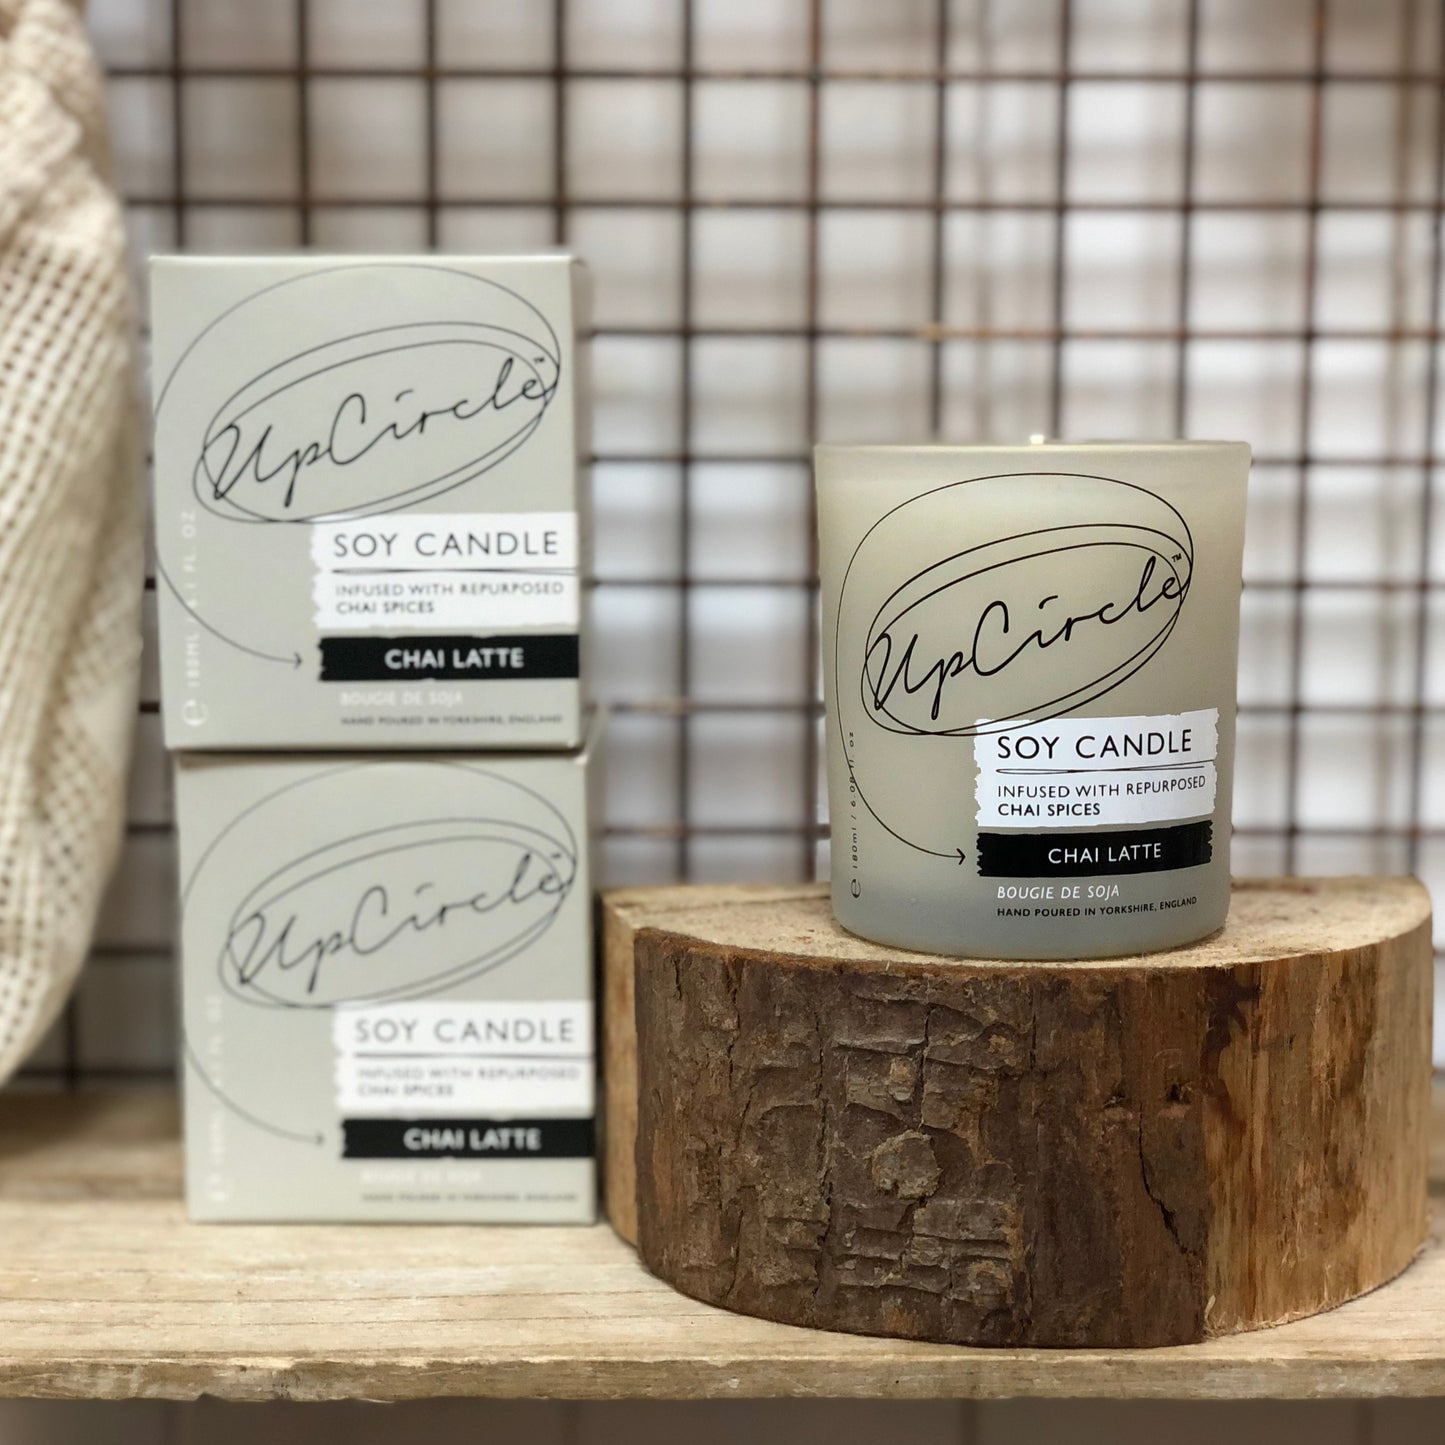 up circle soy candle on display in weigh and pay